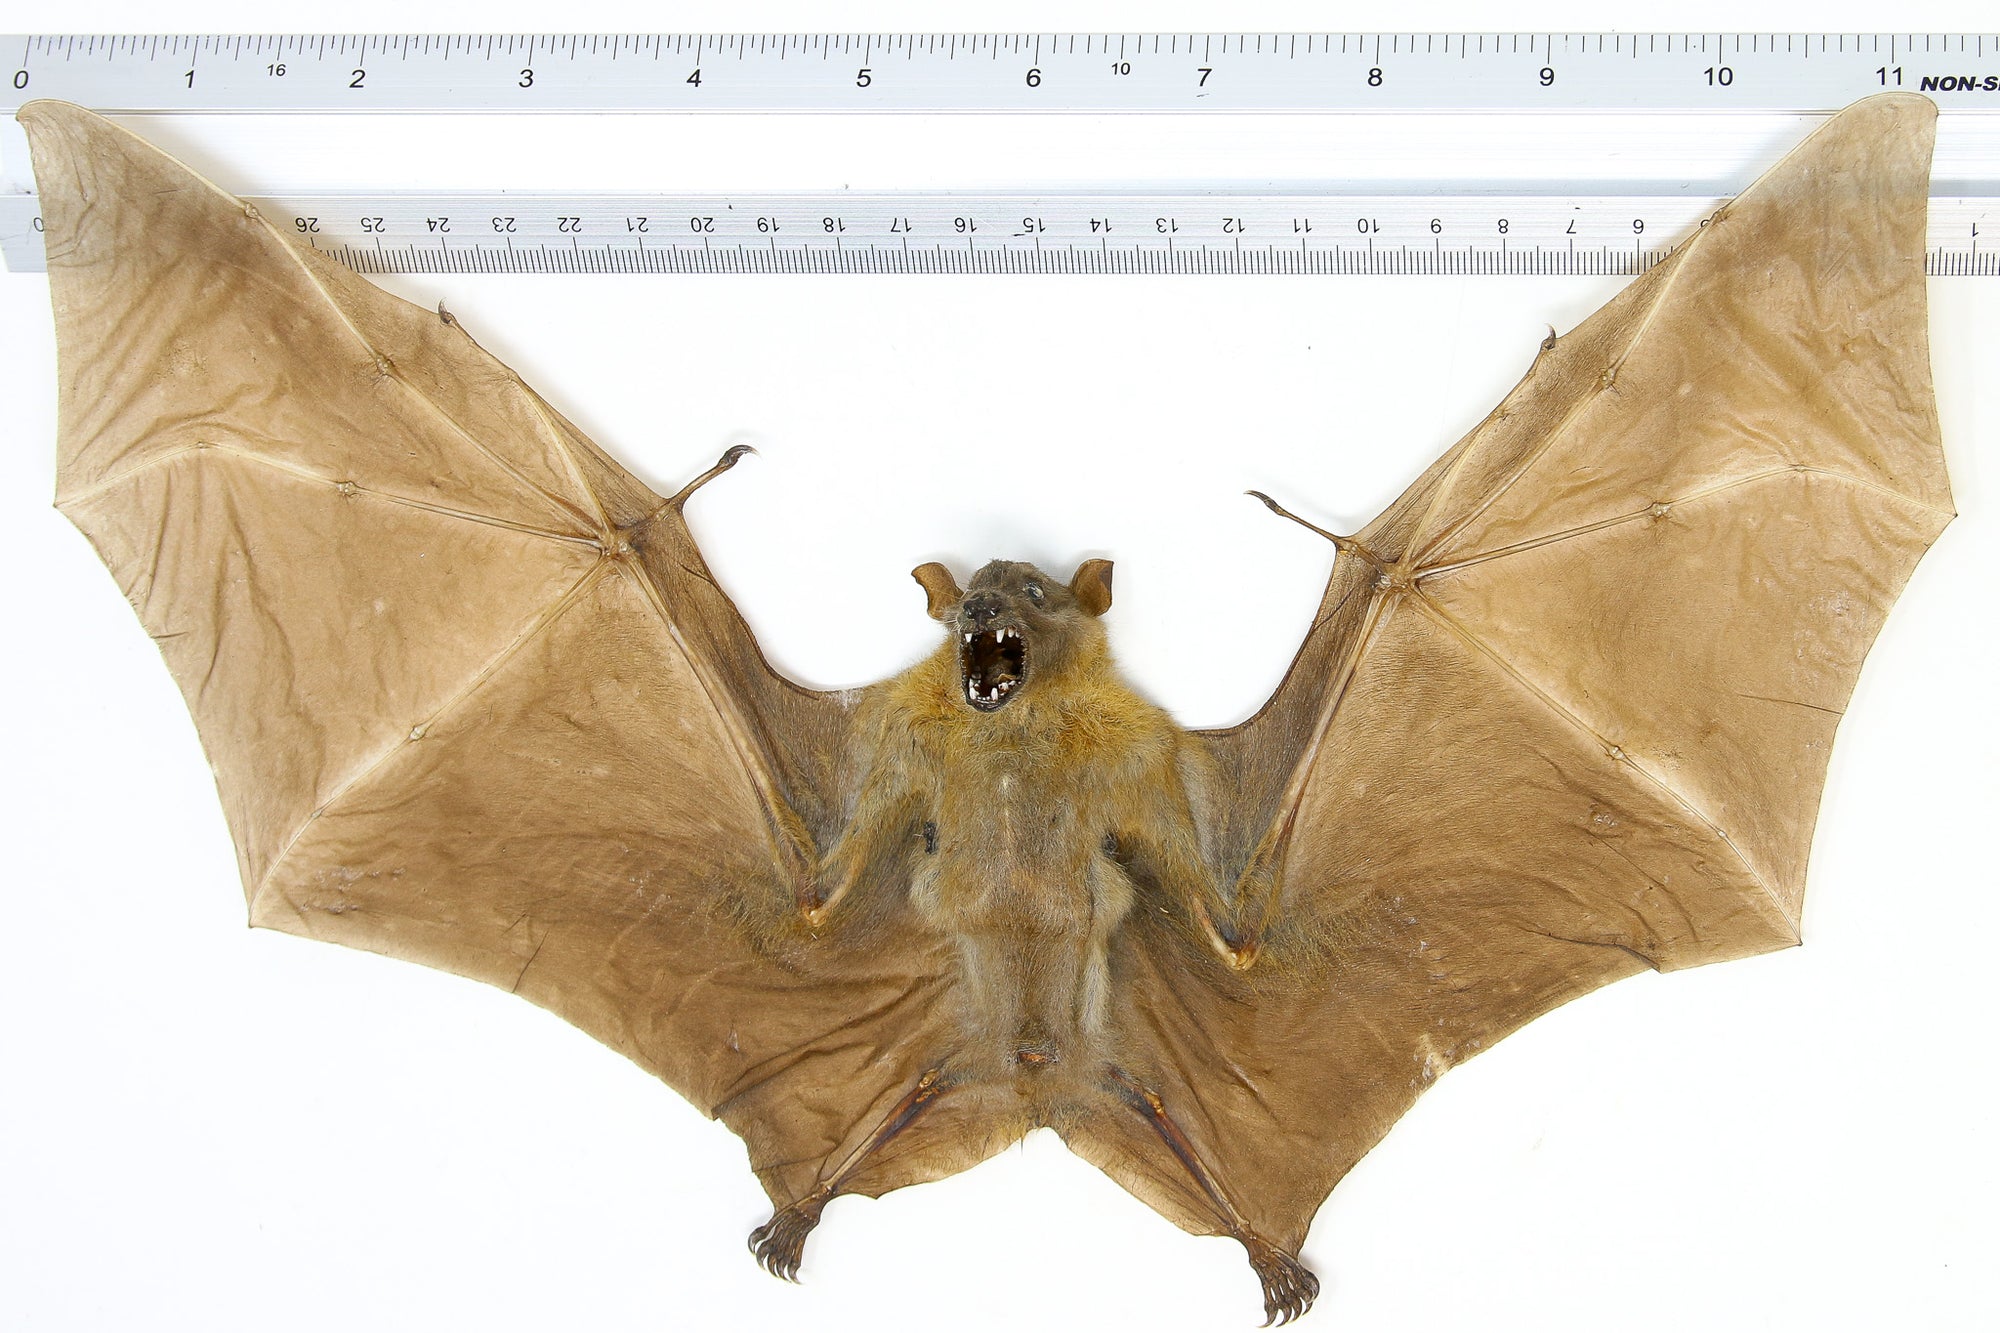 Minute Fruit Bat (Cynopterus minutus) | A1 Spread Specimen | Indonesia | Dry-preserved Taxidermy